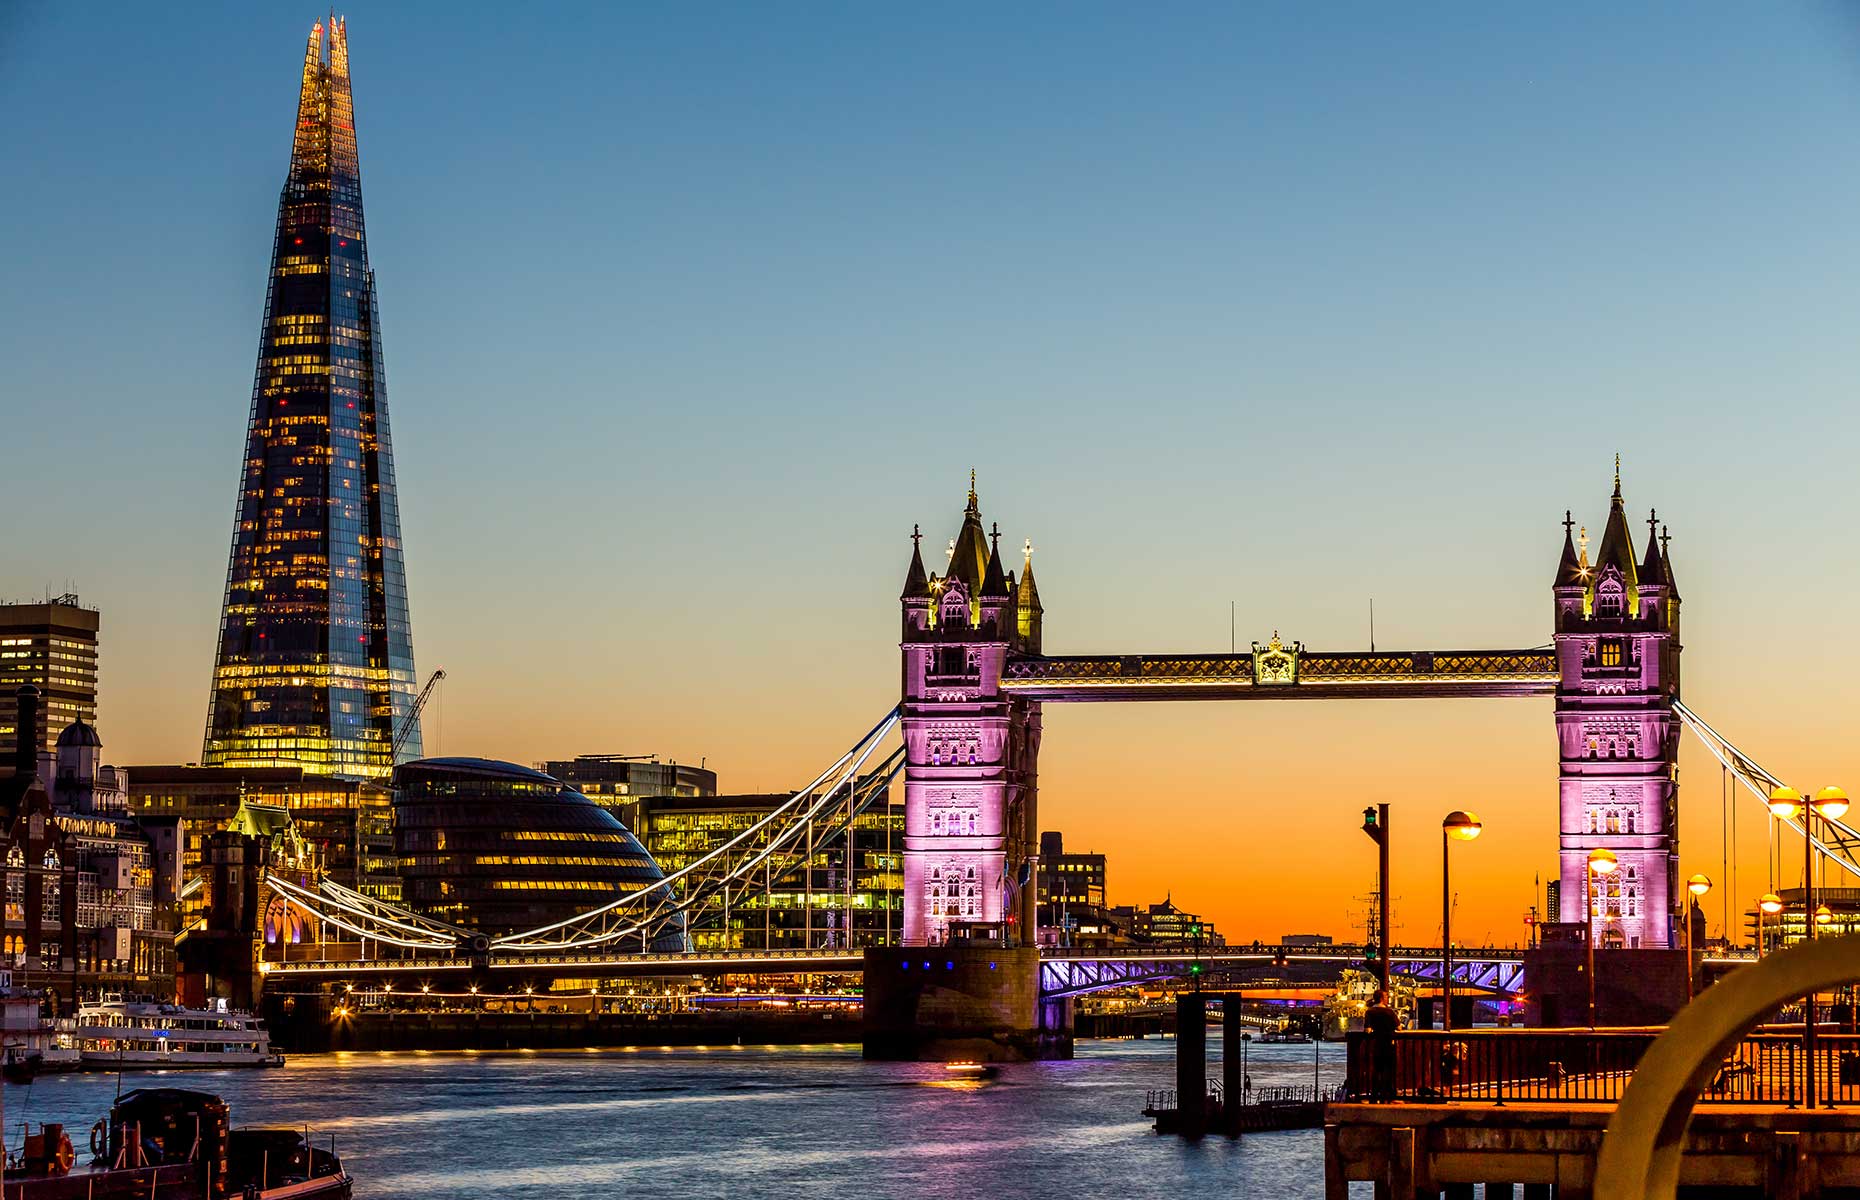 Win a weekend stay for two at the London Bridge Hotel